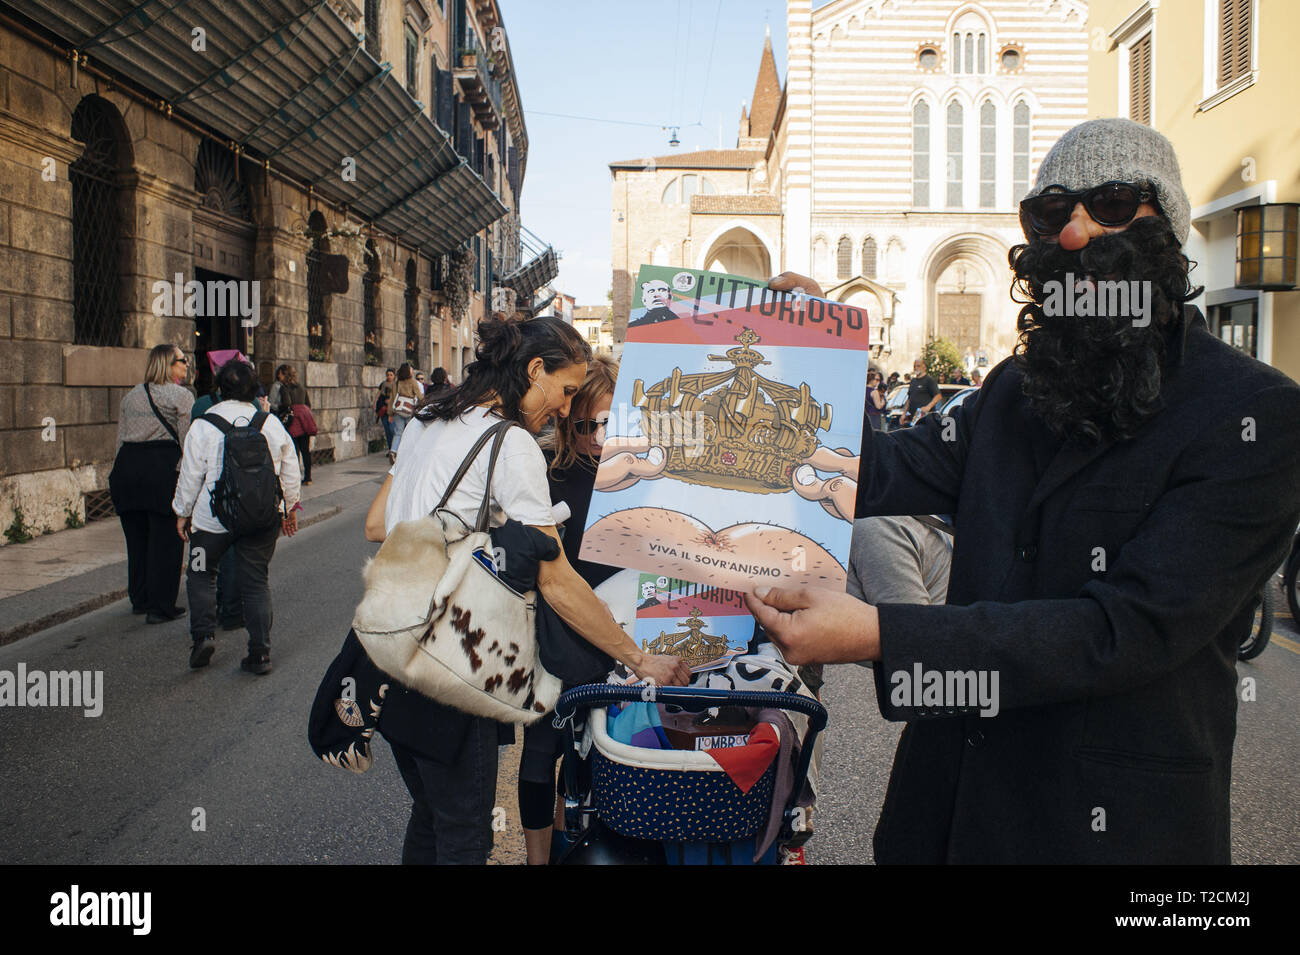 Verona, Veneto, Italy. 30th Mar, 2019. Participants seen trying to sensitize the abortion issues during the protest.The Italian Women organization Non Una di Meno called for a march against the thirteenth 'World Congress of Families'' (WCF) in Verona. The WCF gathers several representatives of 'pro-life movements'' in Europe and abroad, personalities from the religious world against abortion and it's reportedly connected to far-rights movements. Non Una di Meno and other associations protest against the WCF's positions against abortion, homosexuality and their aims to write a glo Stock Photo